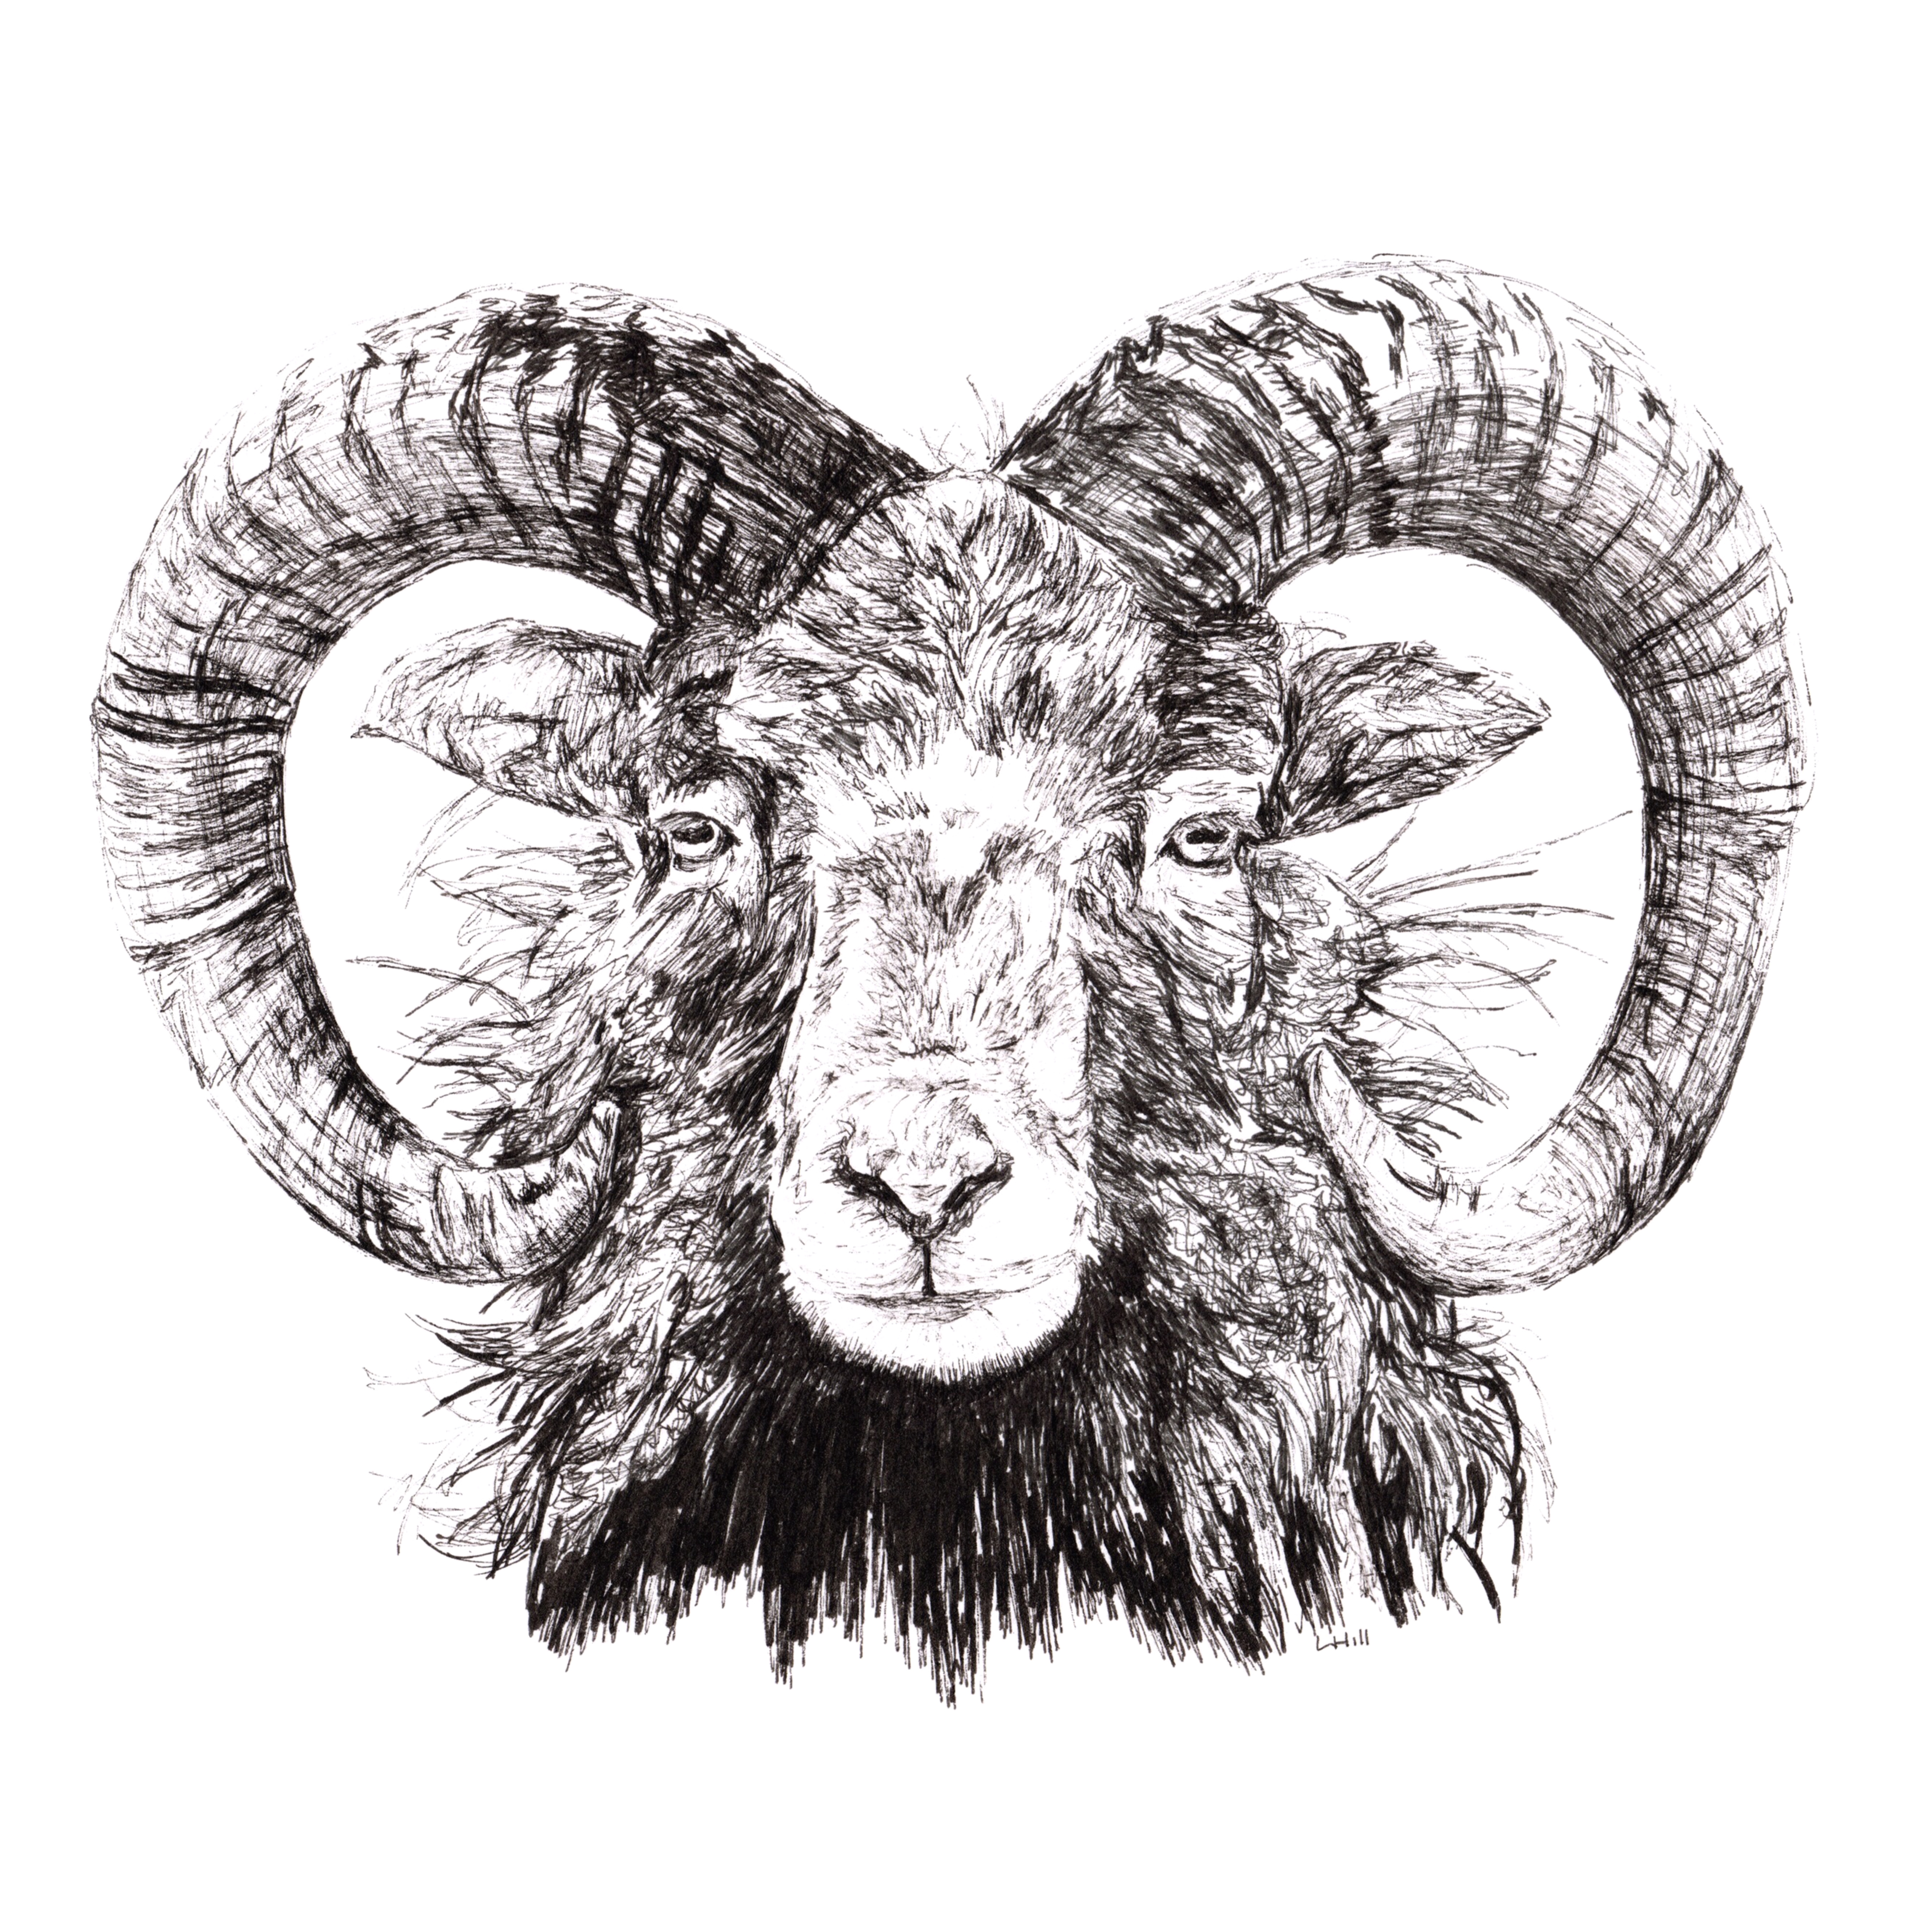 North Ronaldsay pen and ink illustration by Louisa Hill